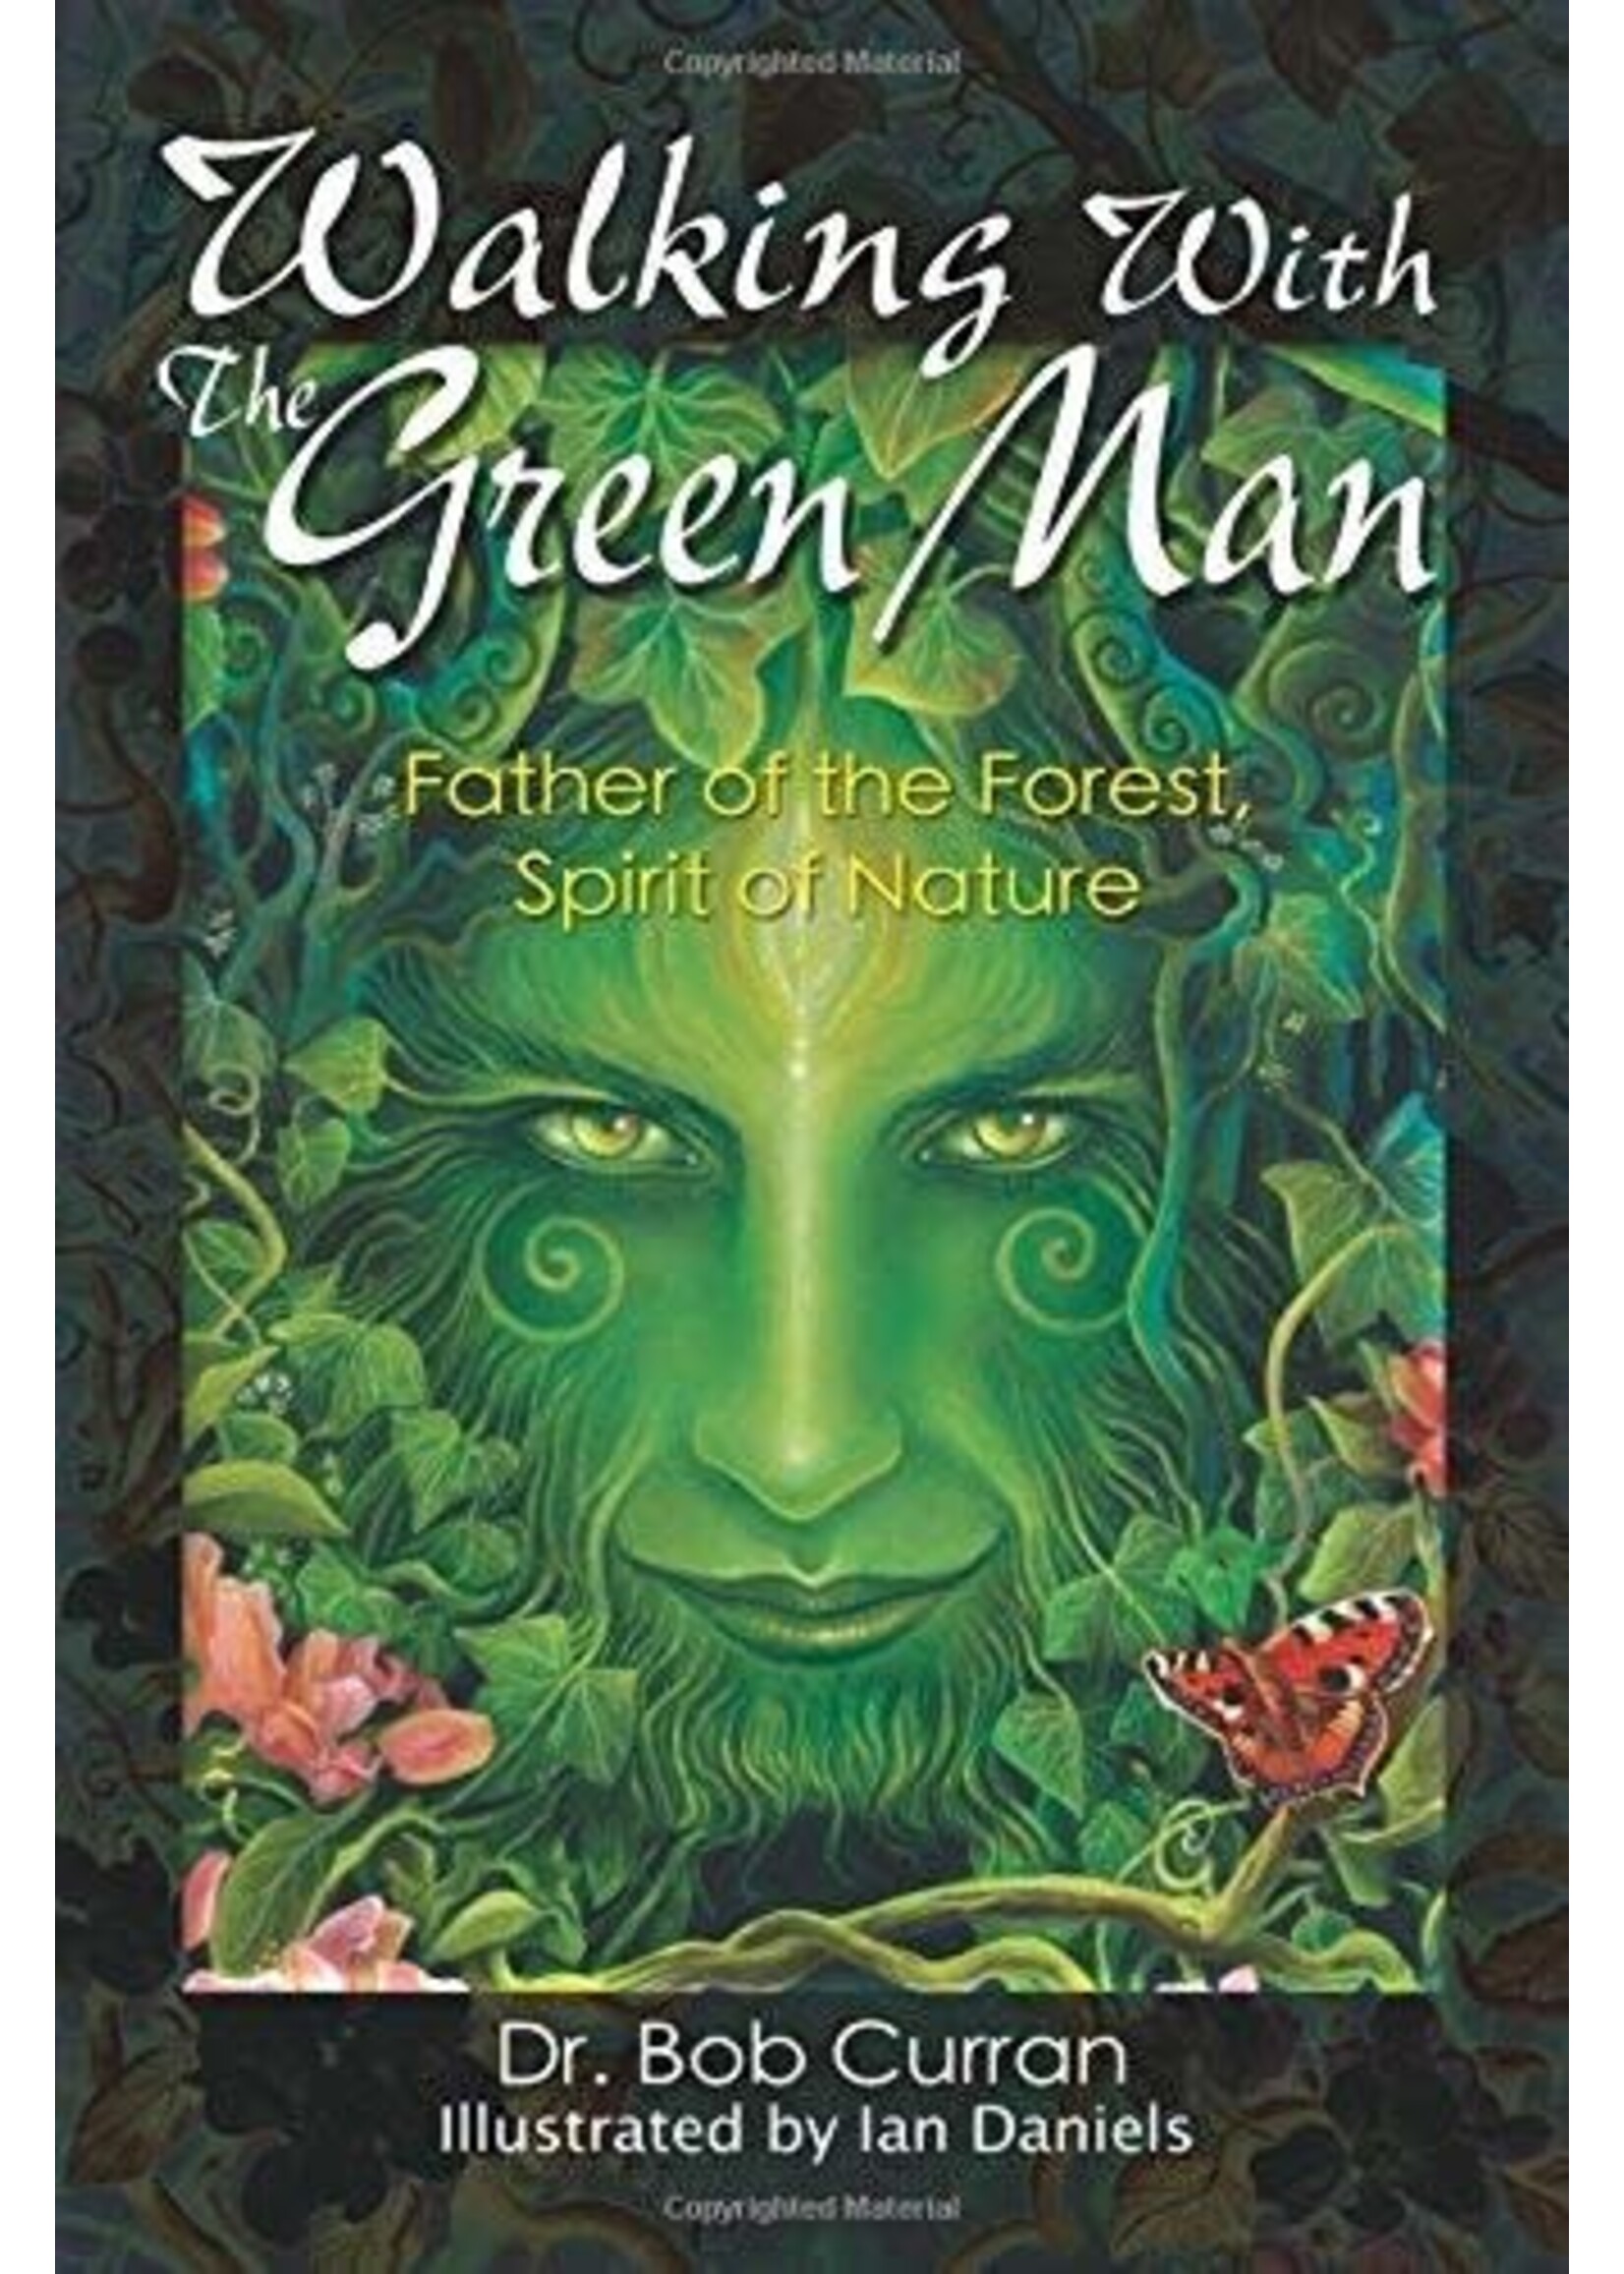 Walking With The Green Man by Bob Curran